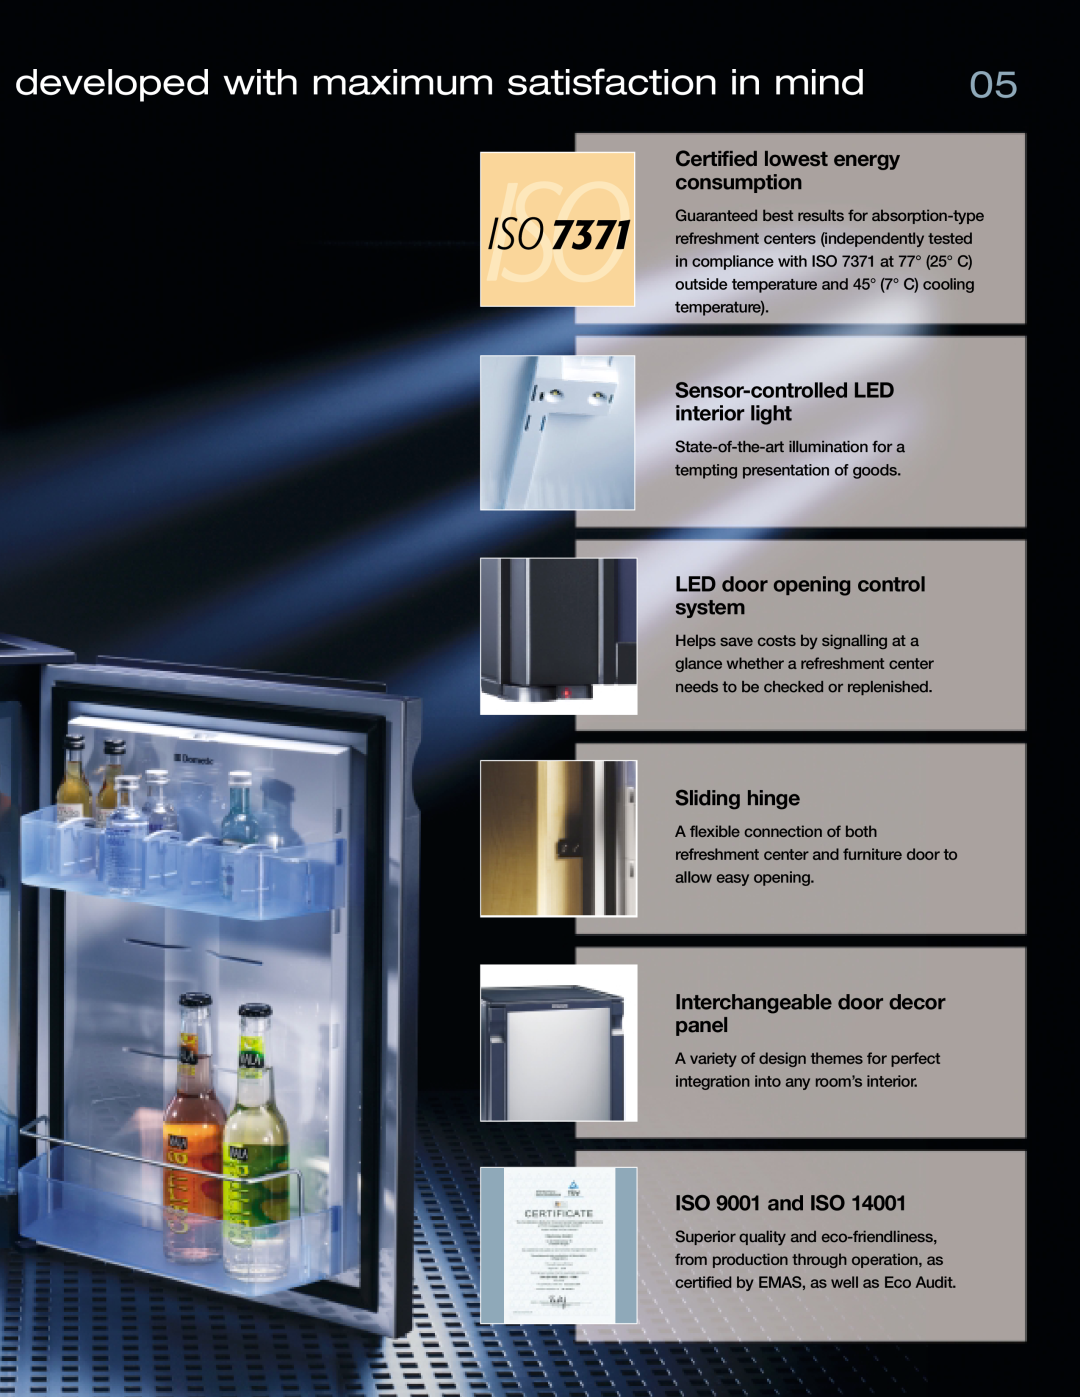 Dometic 6000 Certified lowest energy consumption, Sensor-controlled LED interior light, LED door opening control system 